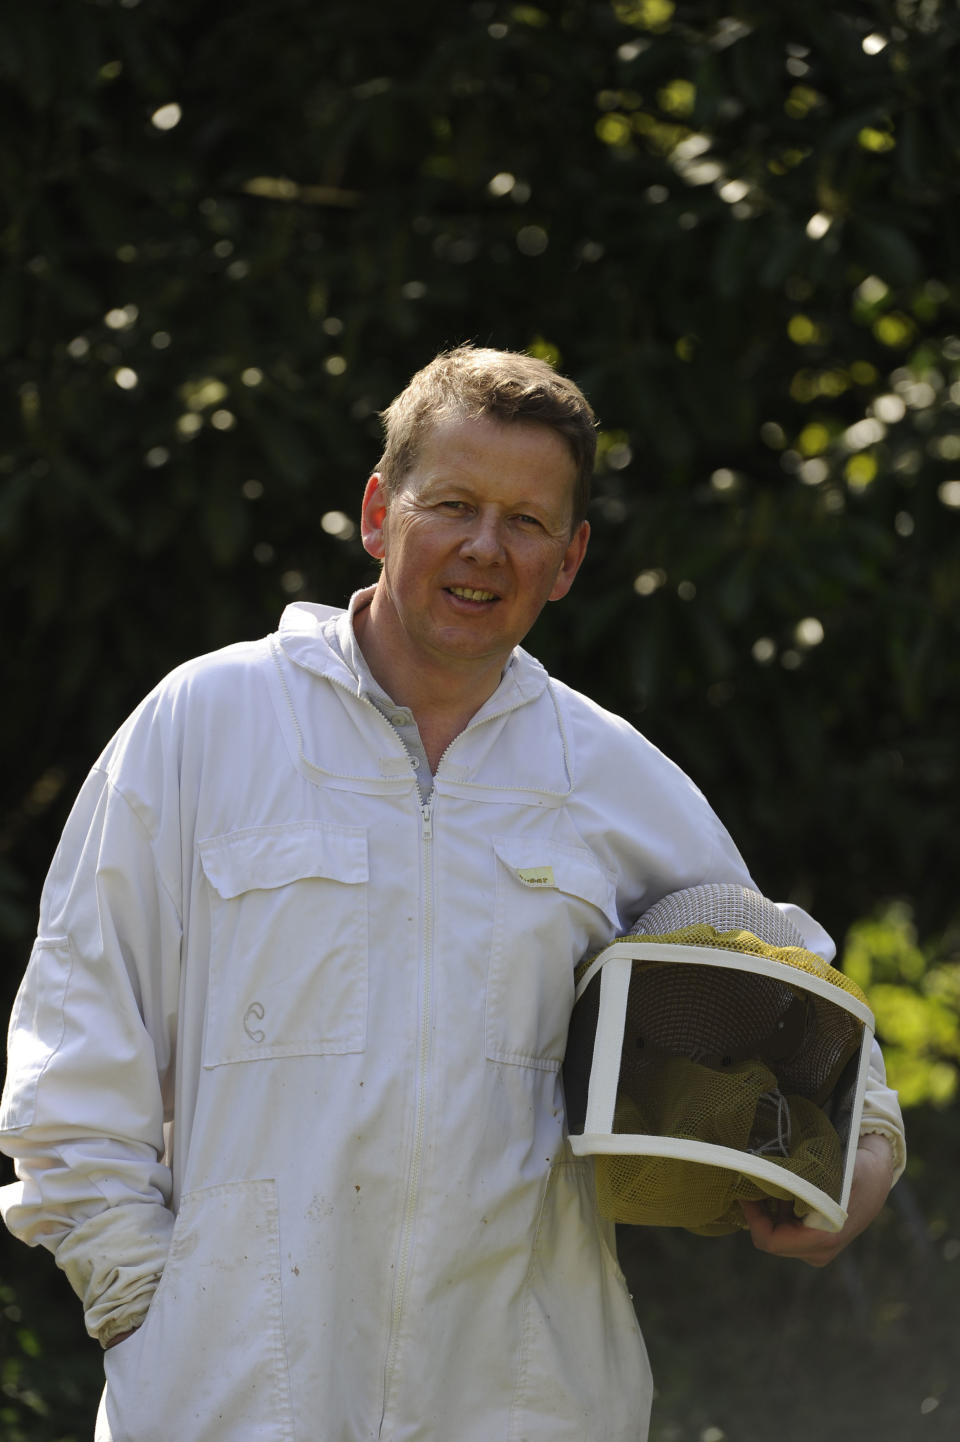 BBC TV presenter Bill Turnbull. A bee keeper at his home in Buckinghamshire, England. (Photo by Paul Hackett/In Pictures/Corbis via Getty Images)